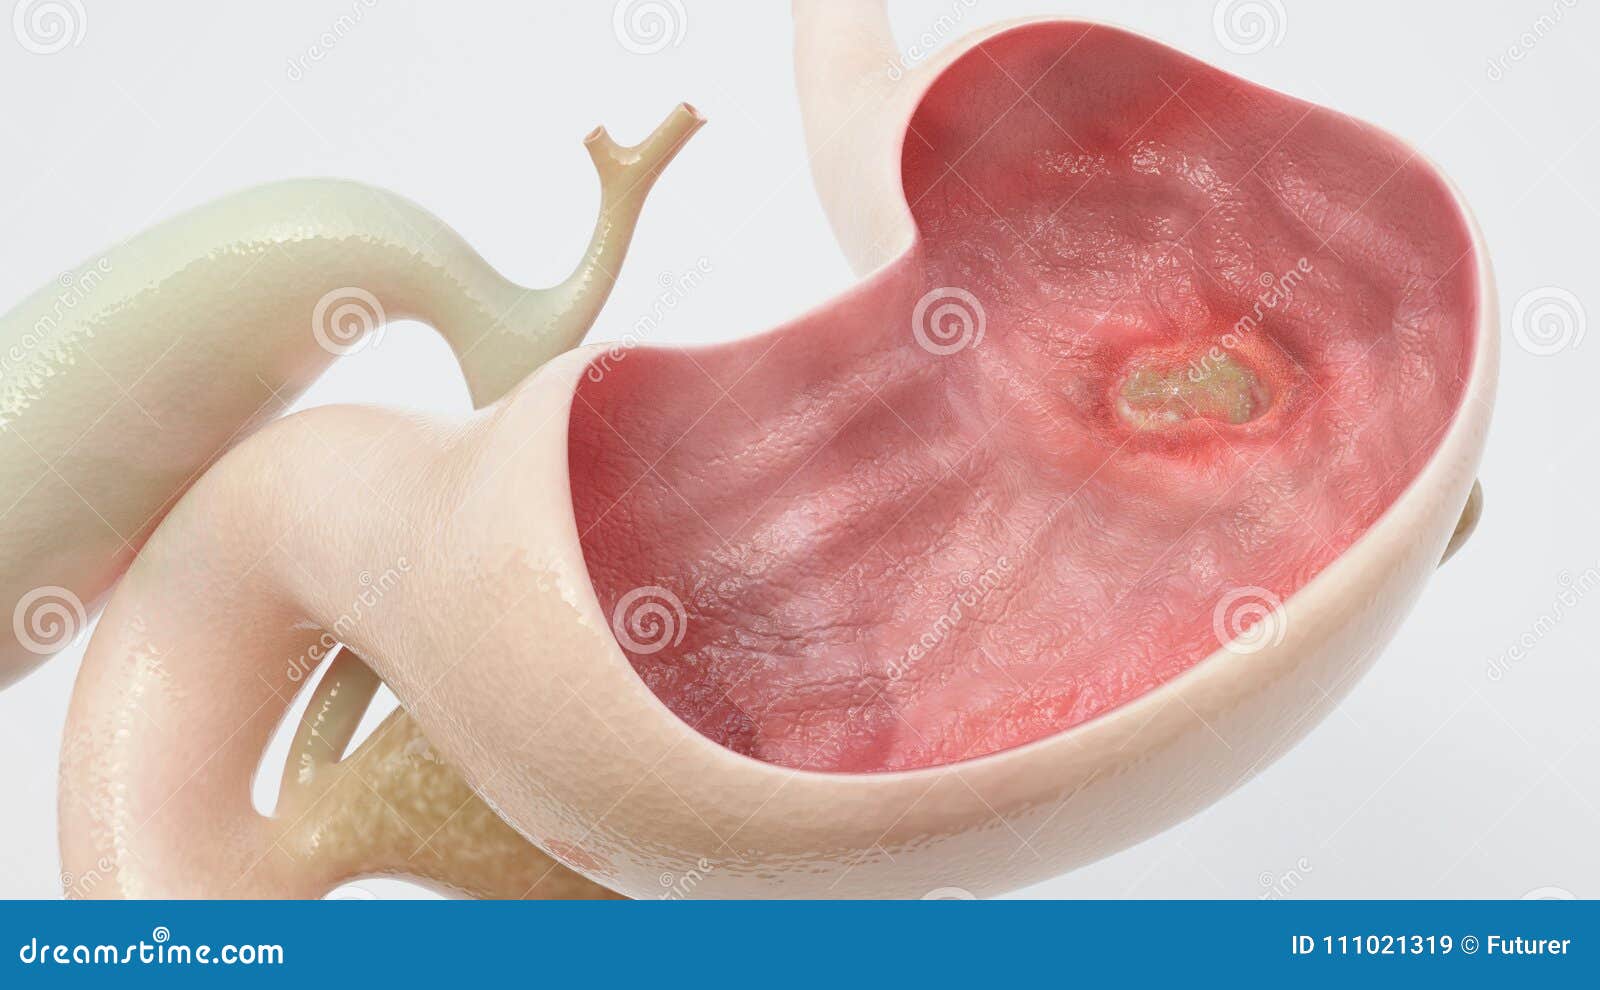 stomach ulcer - high degree of detail - 3d rendering